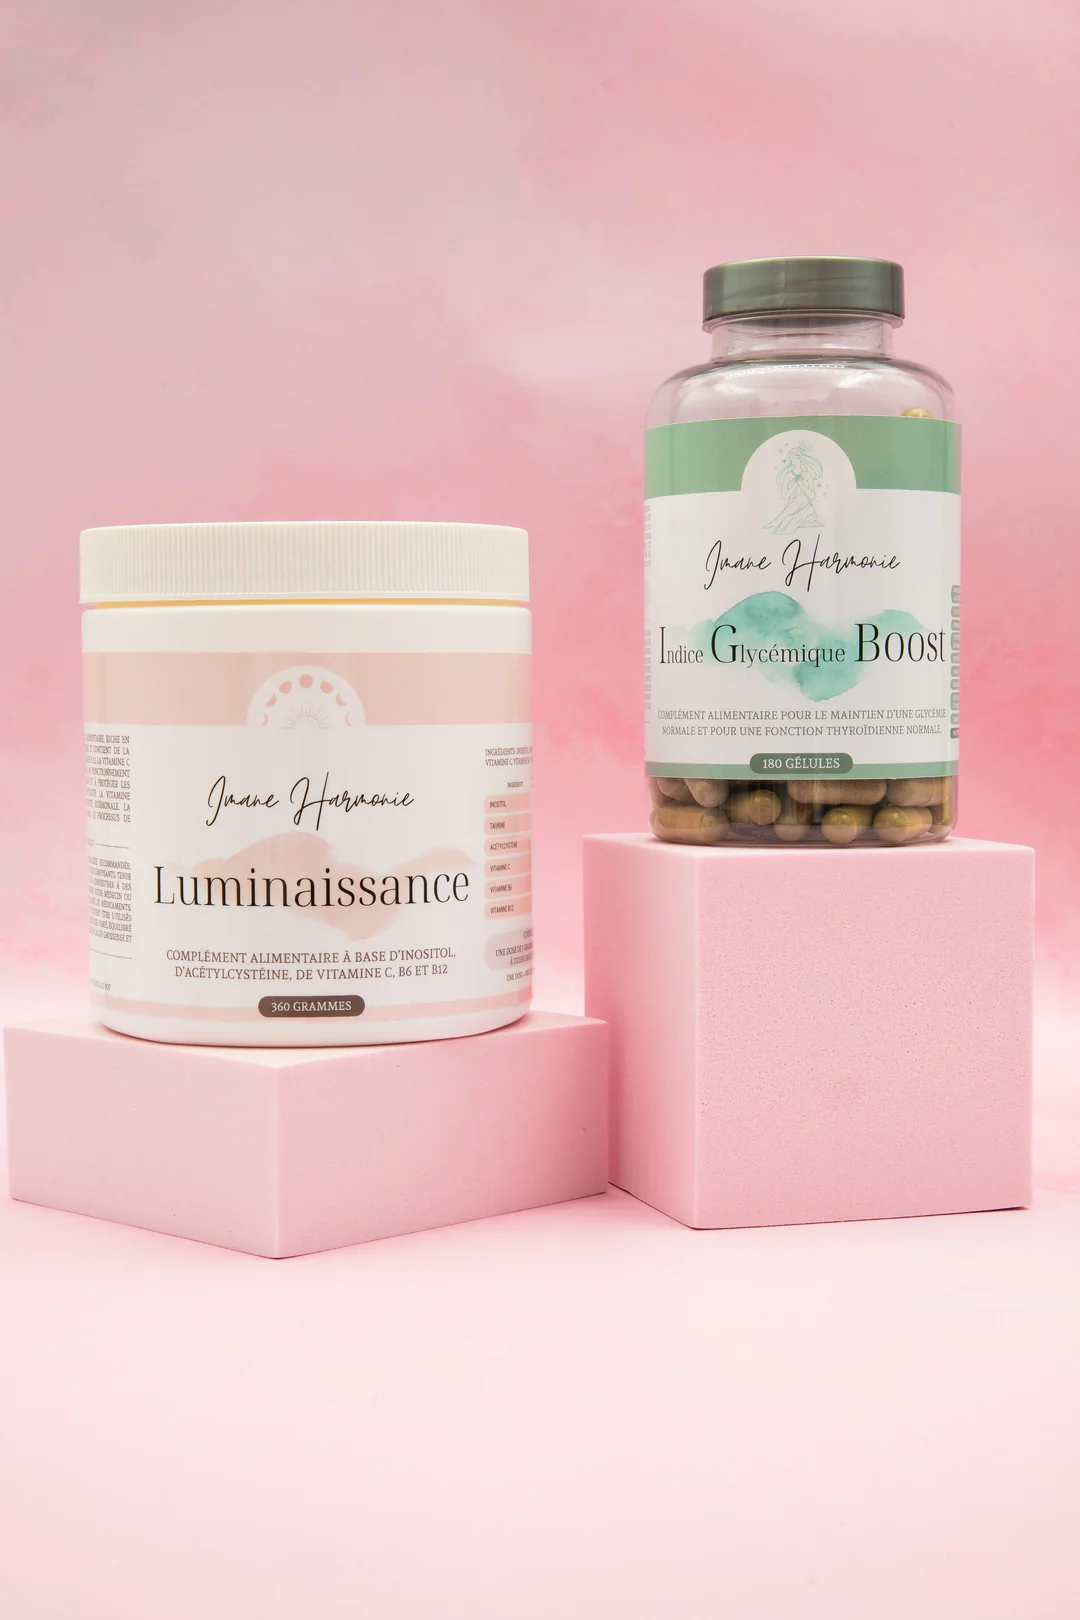 Luminaissance and glycemic index boost supplements. The Weight loss PCOS Bundle provides you with all the keys to regain control of your hormones and blood sugar